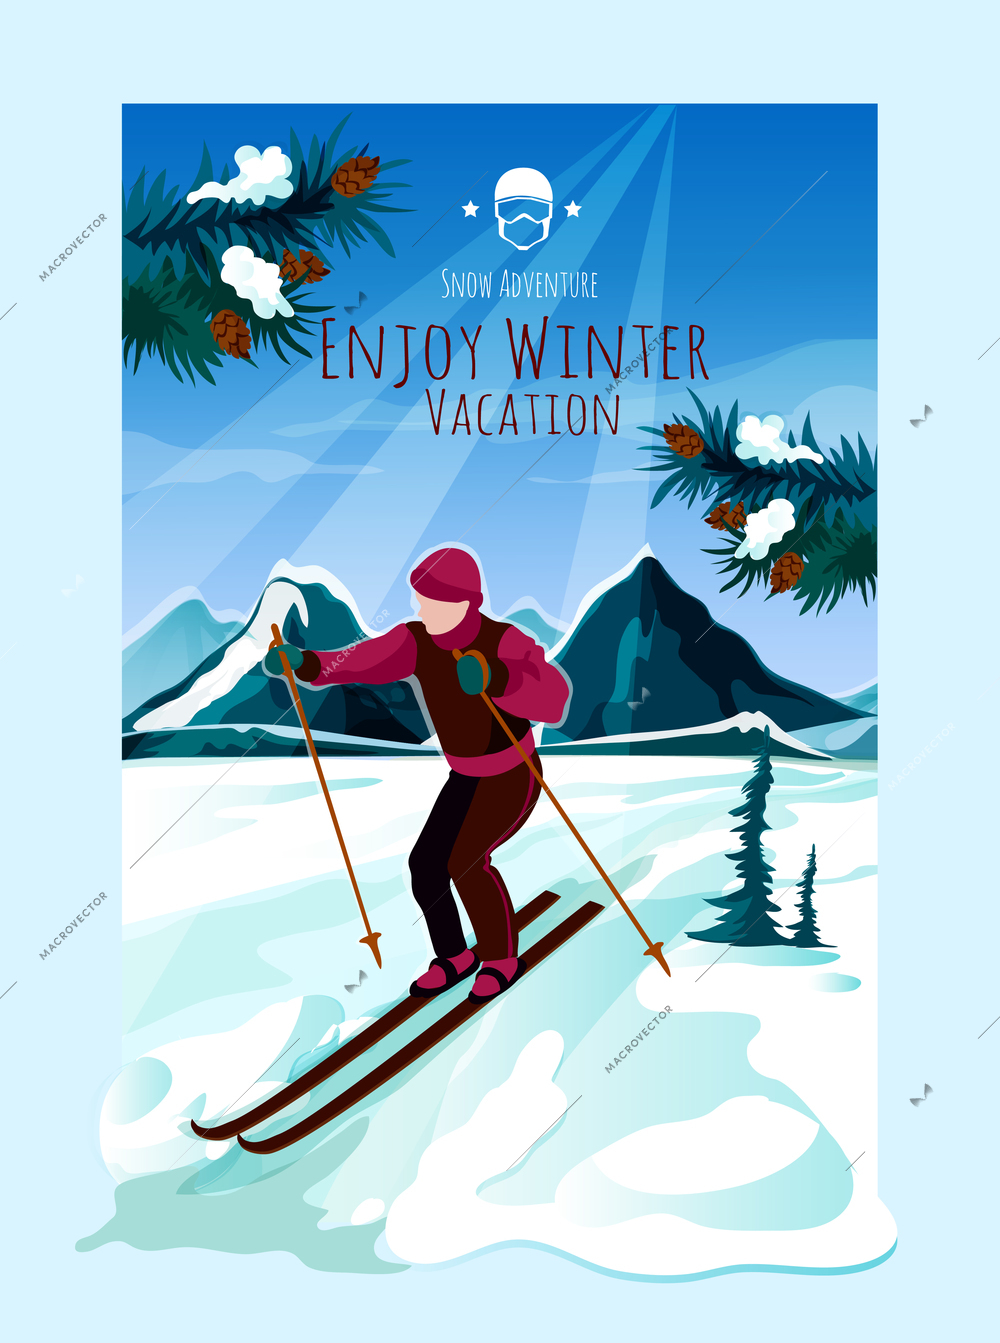 Mountain landscape poster with man skiing and pine tree branches on background vector illustration